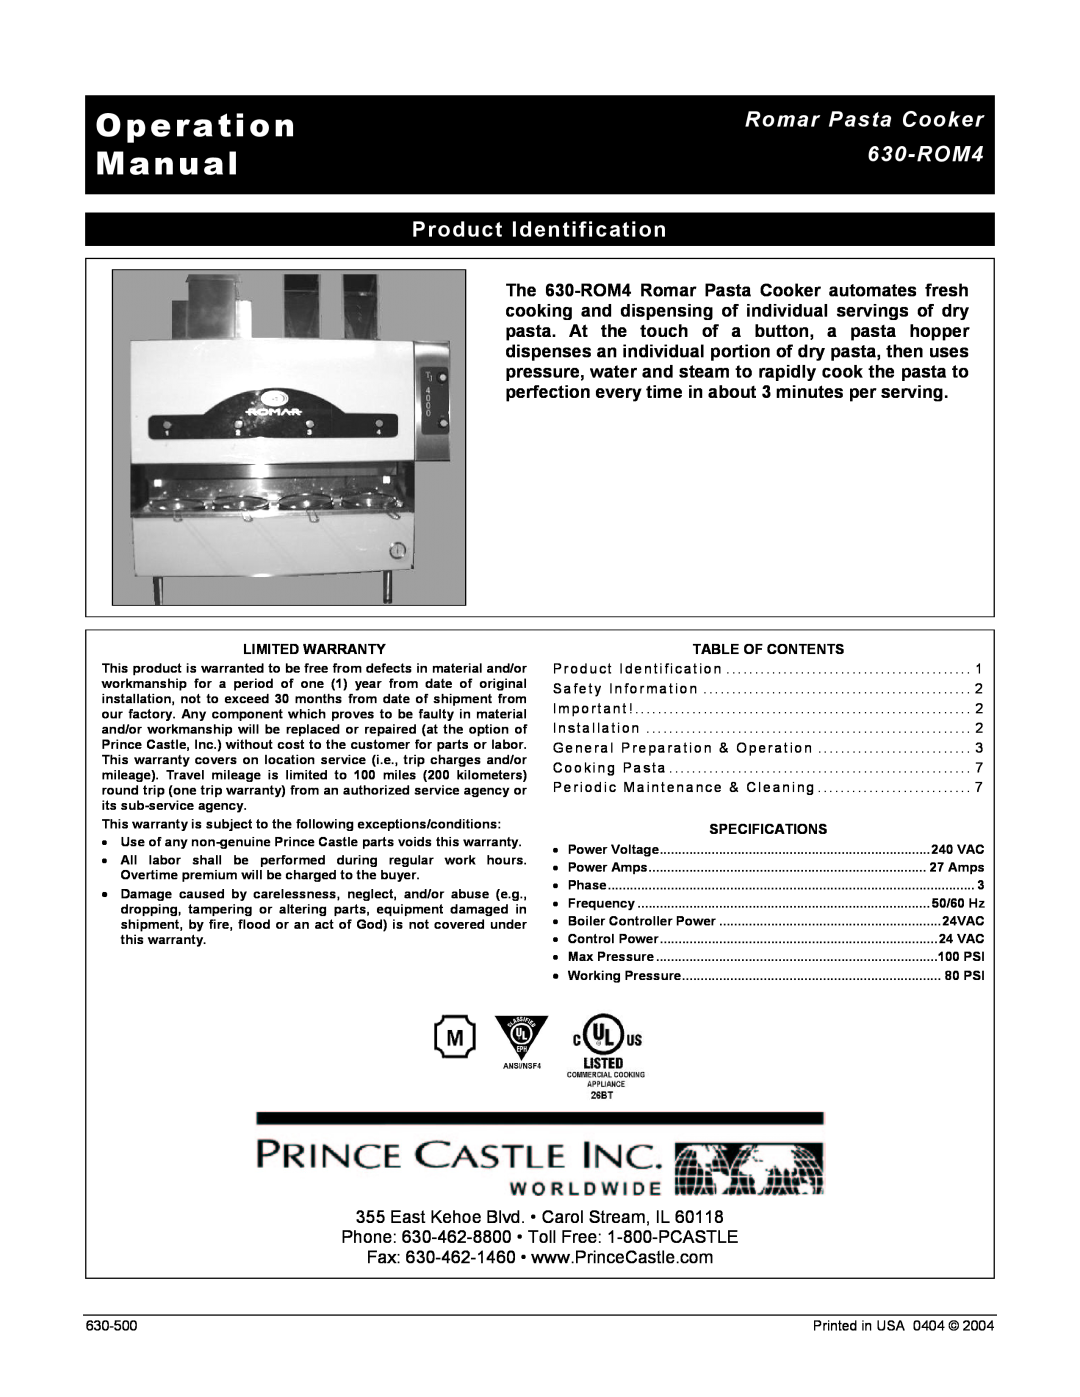 Prince Castle manual Romar Pasta Cooker 630-ROM4, Product Identification, P r o d uct Identification, Installation 